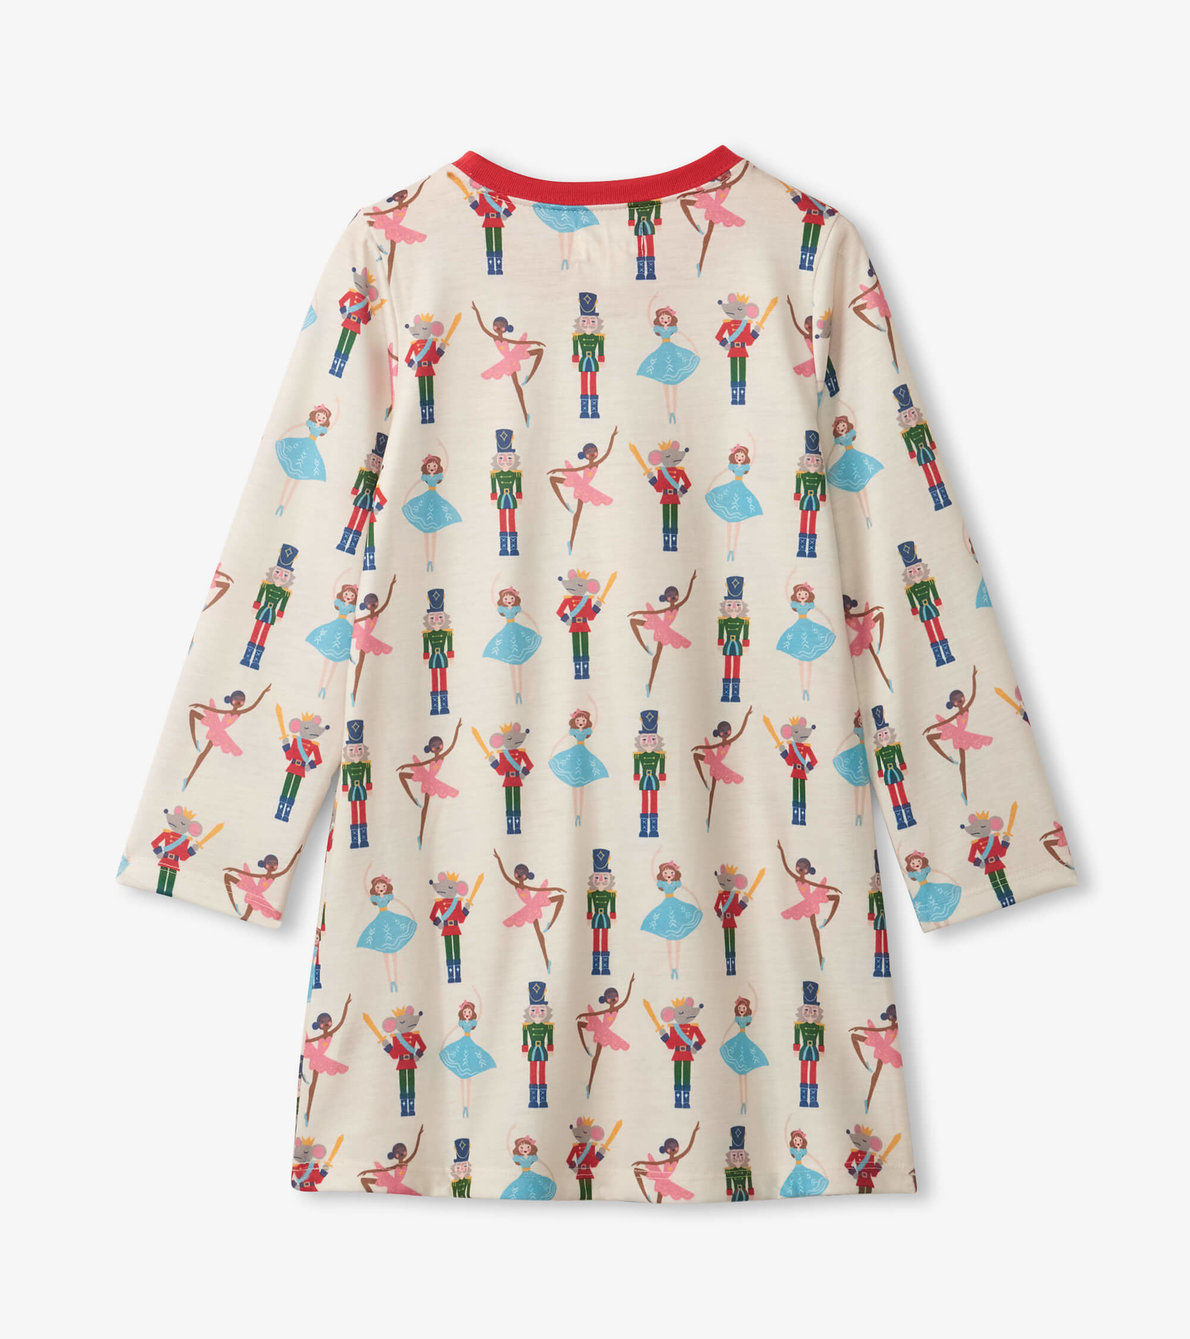 View larger image of Nutcracker Long Sleeve Girls Nightgown